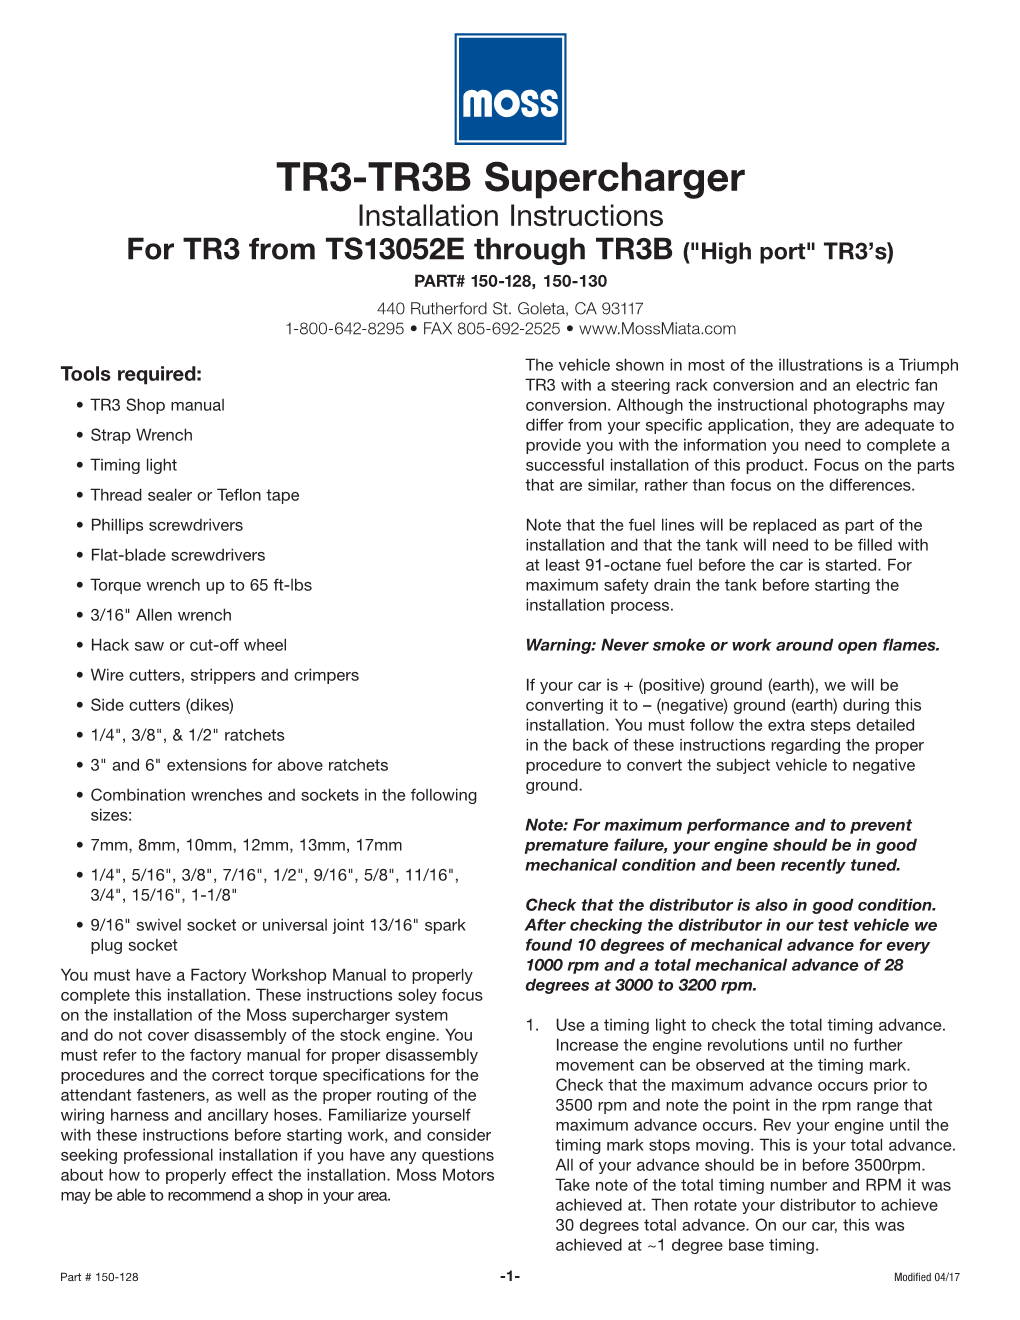 TR3-TR3B Supercharger Installation Instructions for TR3 from TS13052E Through TR3B ("High Port" TR3’S) PART# 150-128, 150-130 440 Rutherford St